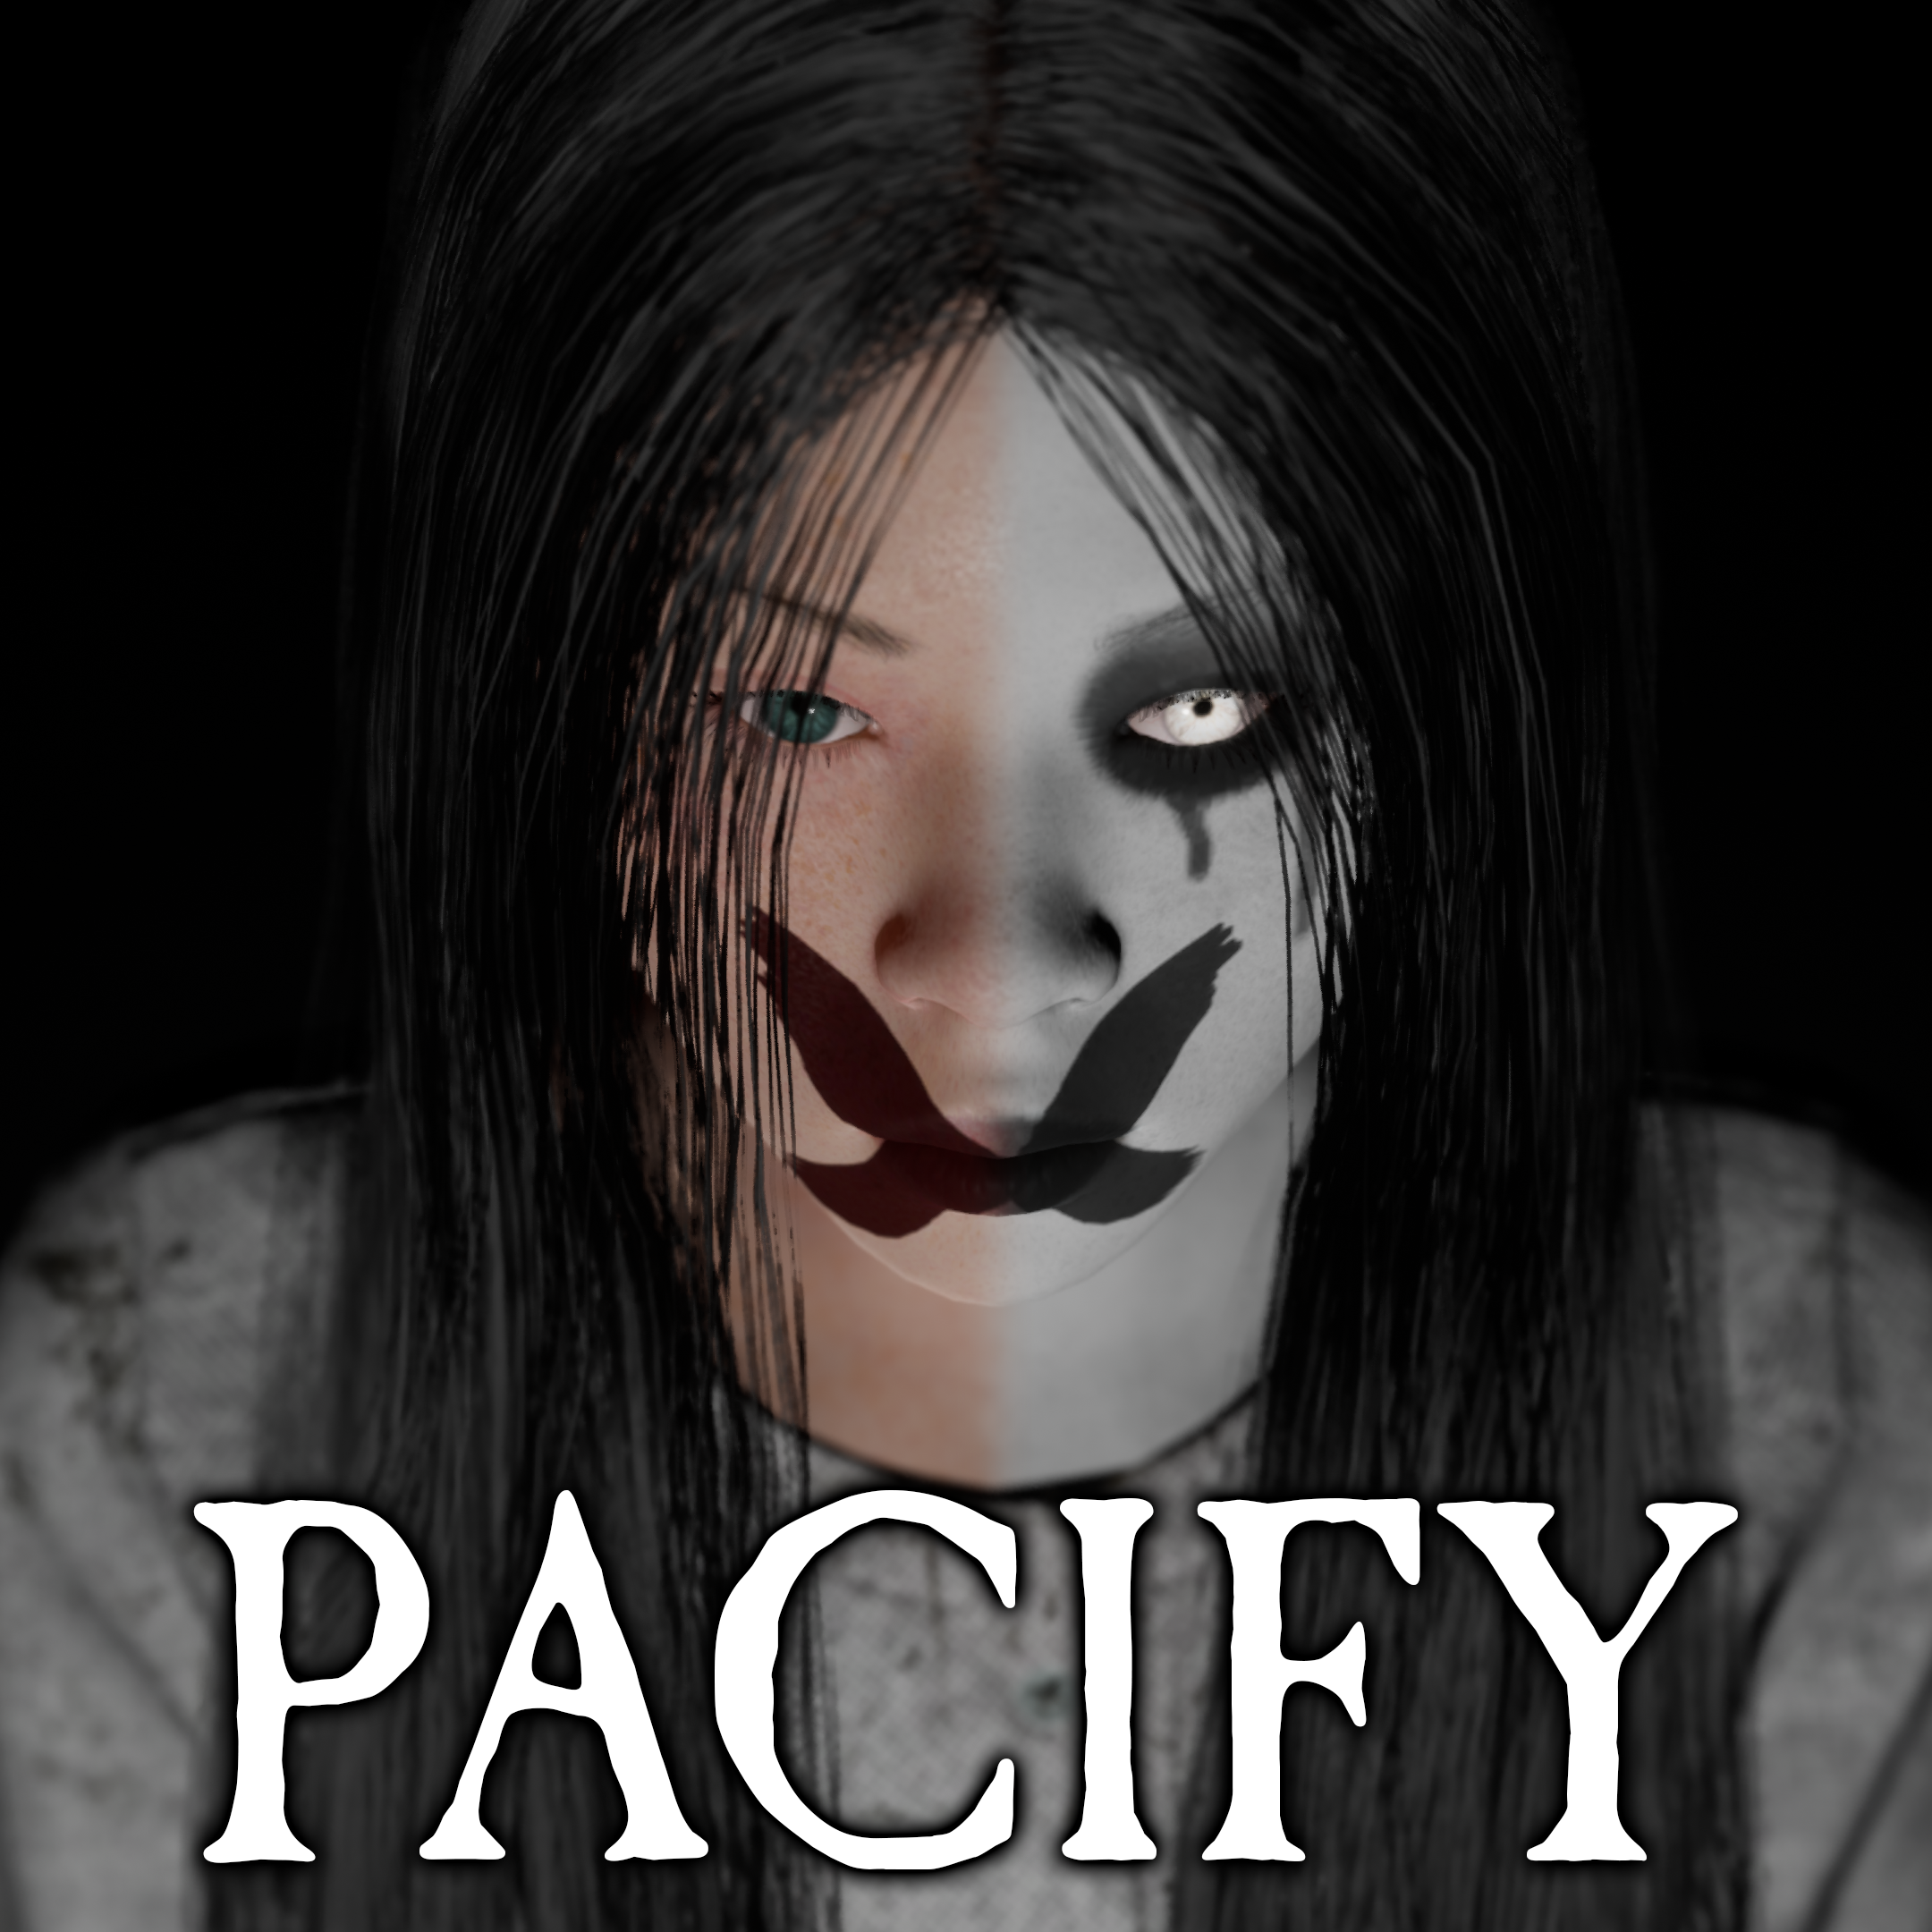 Pacify screenshots, image and picture